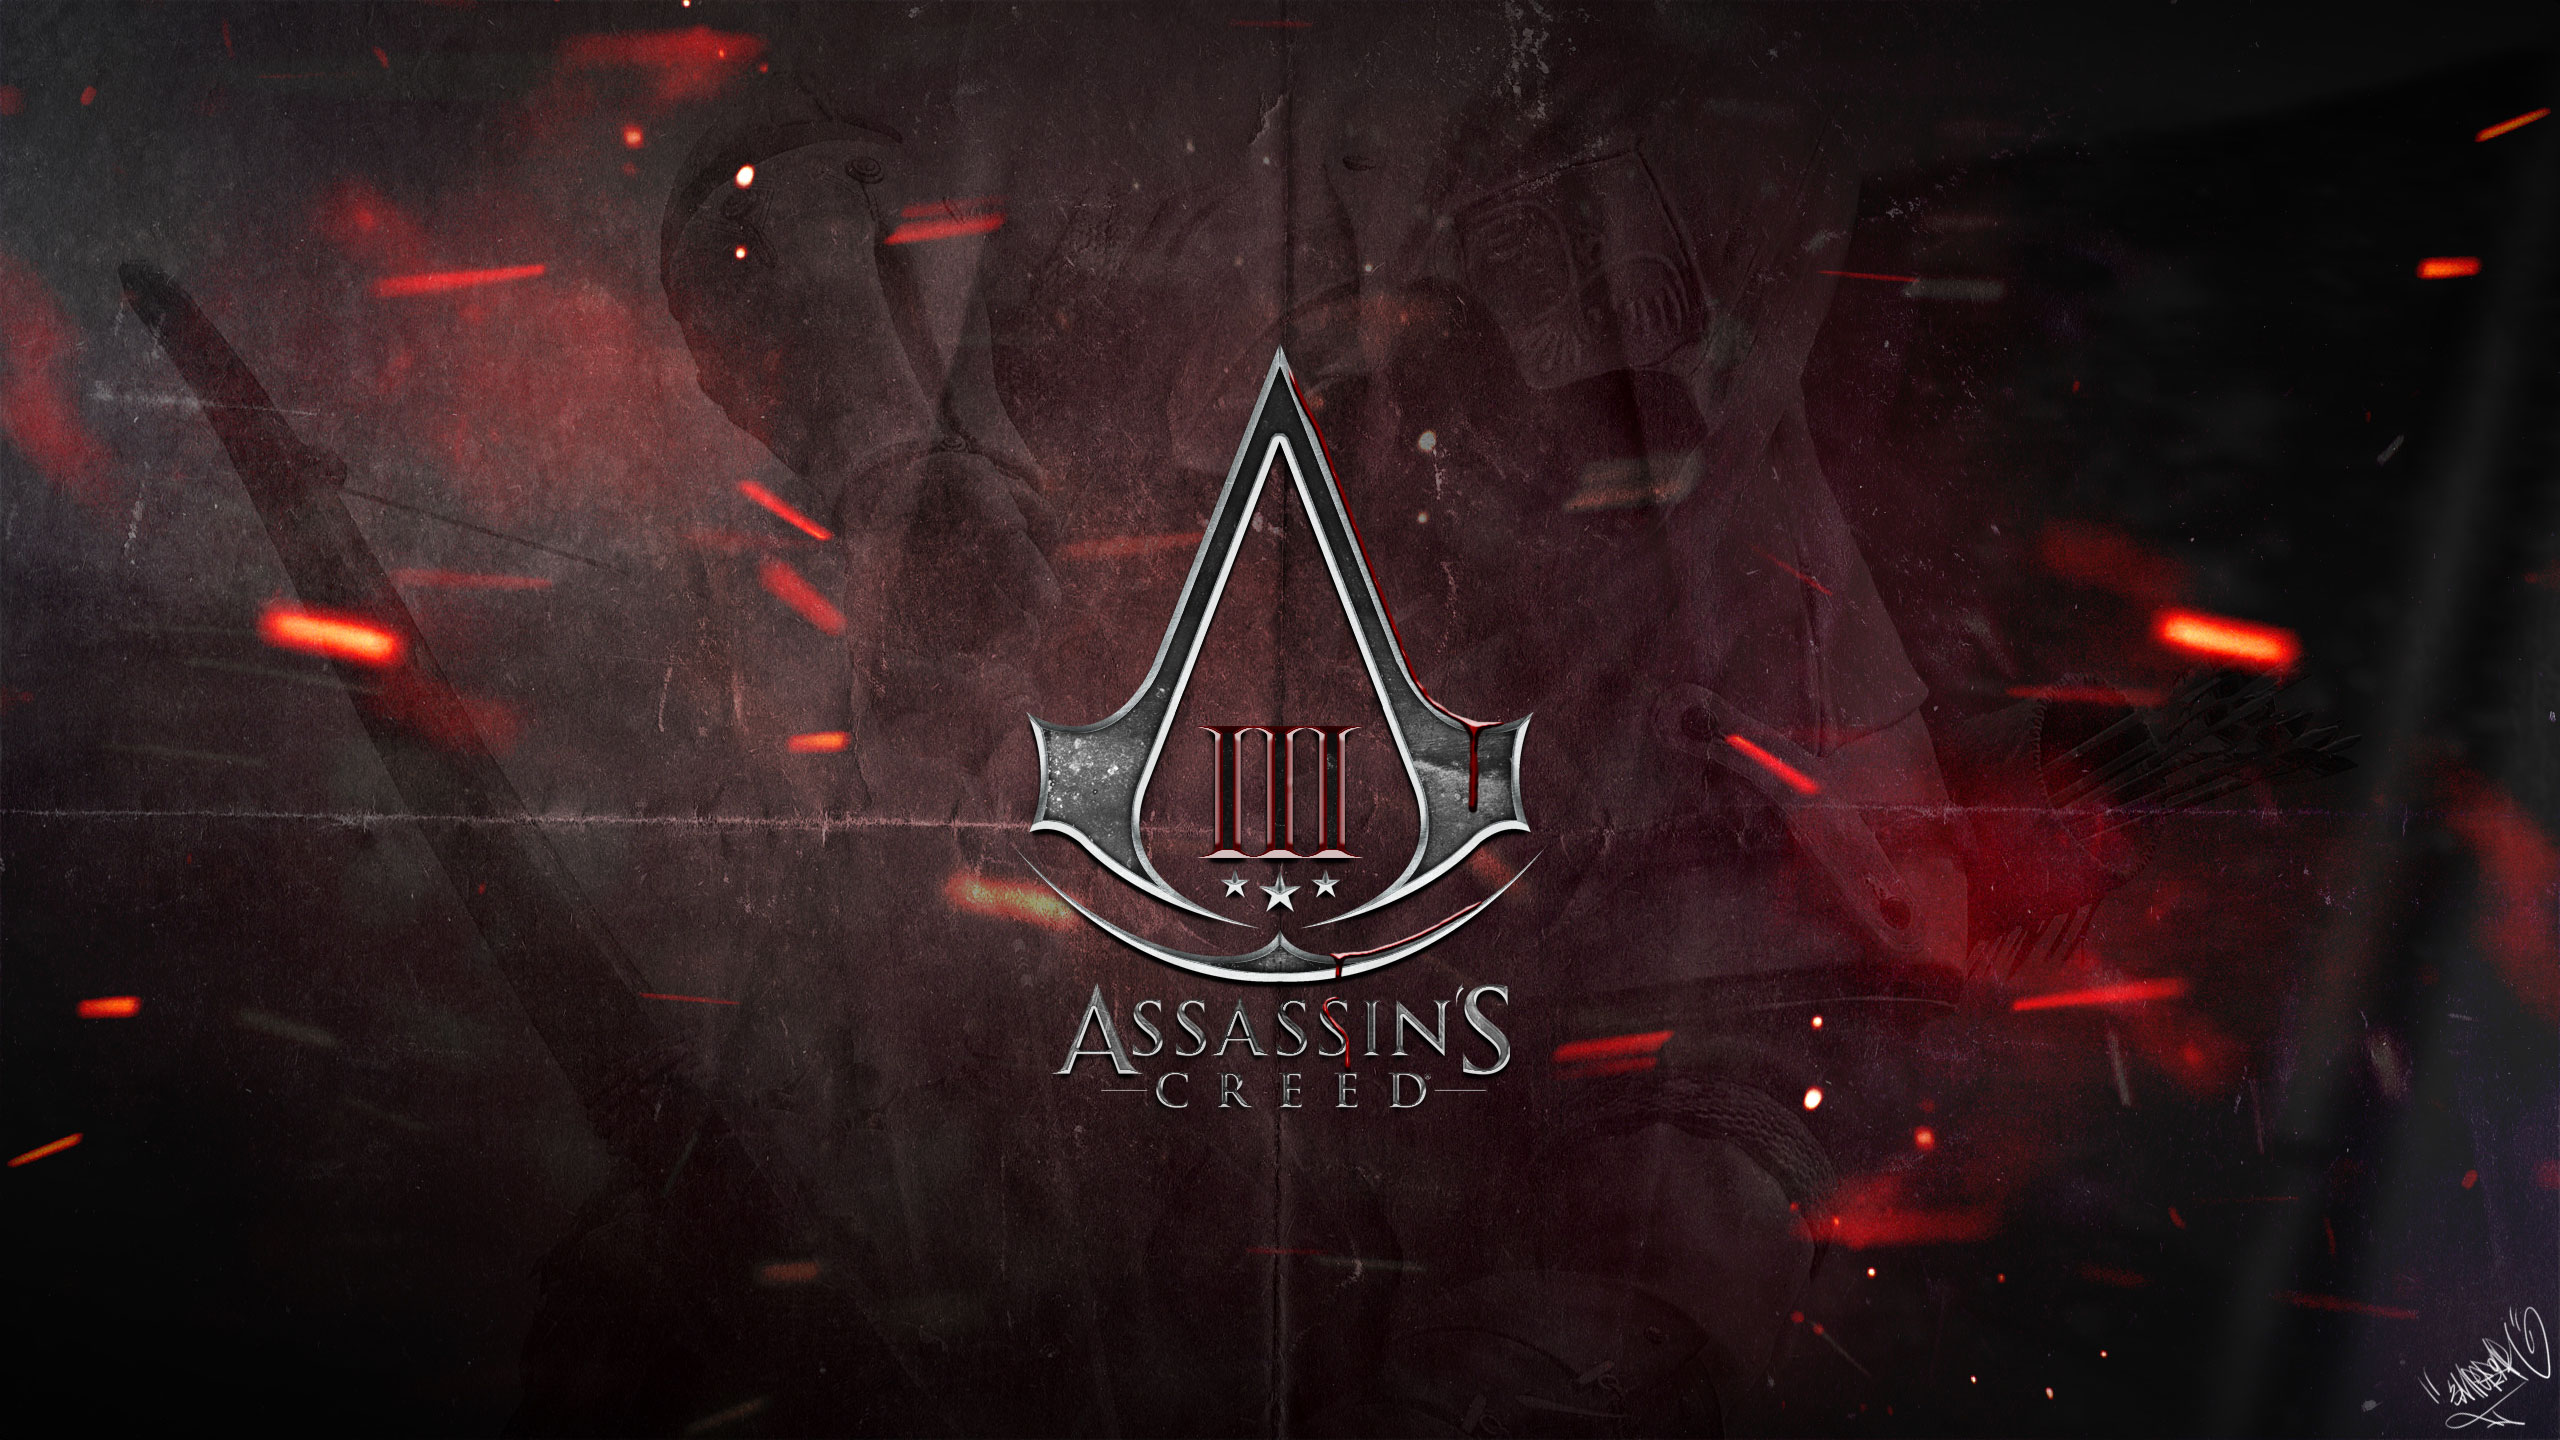 The Assassin S Image Creed HD Wallpaper And Background